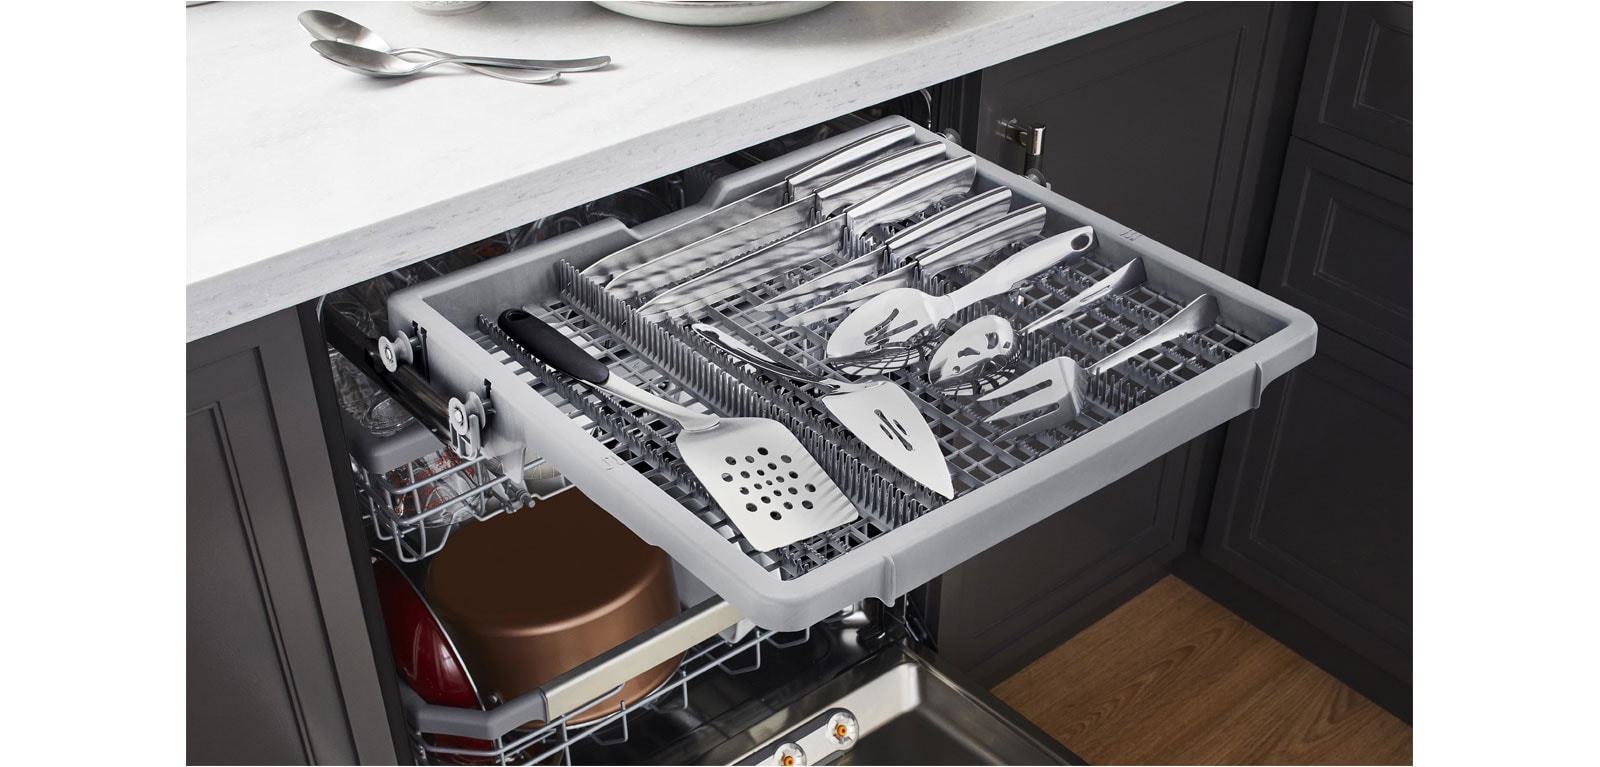 Tips to Keep Your Dishwasher Clean